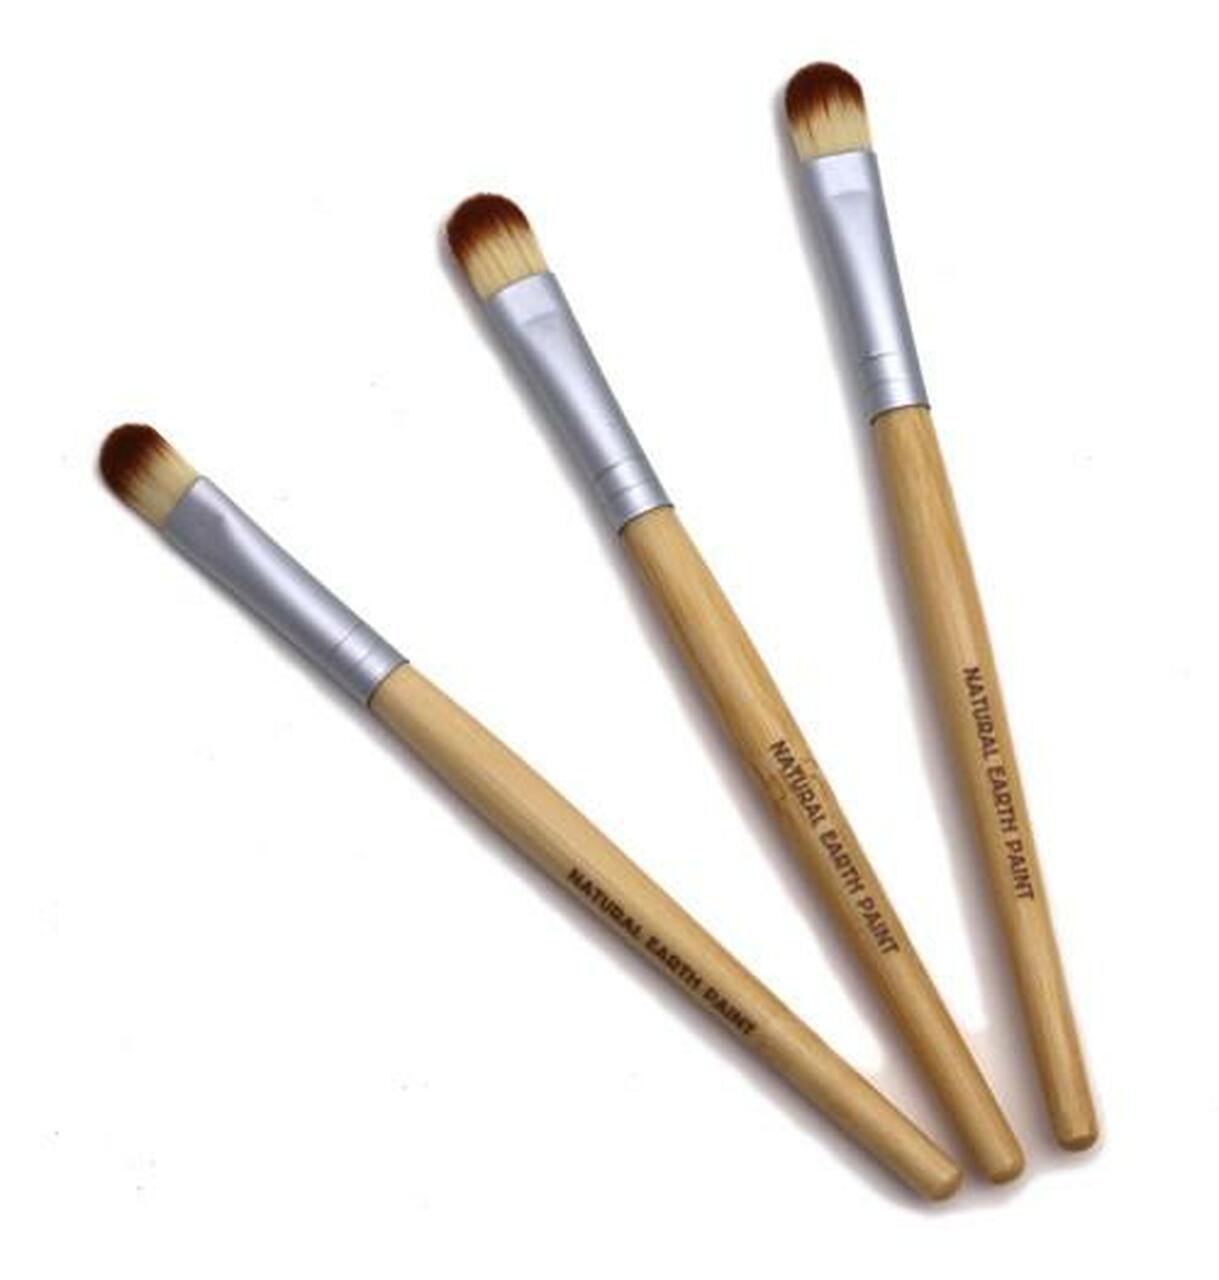 Earth Paint - Face Paint Brushes set of 3